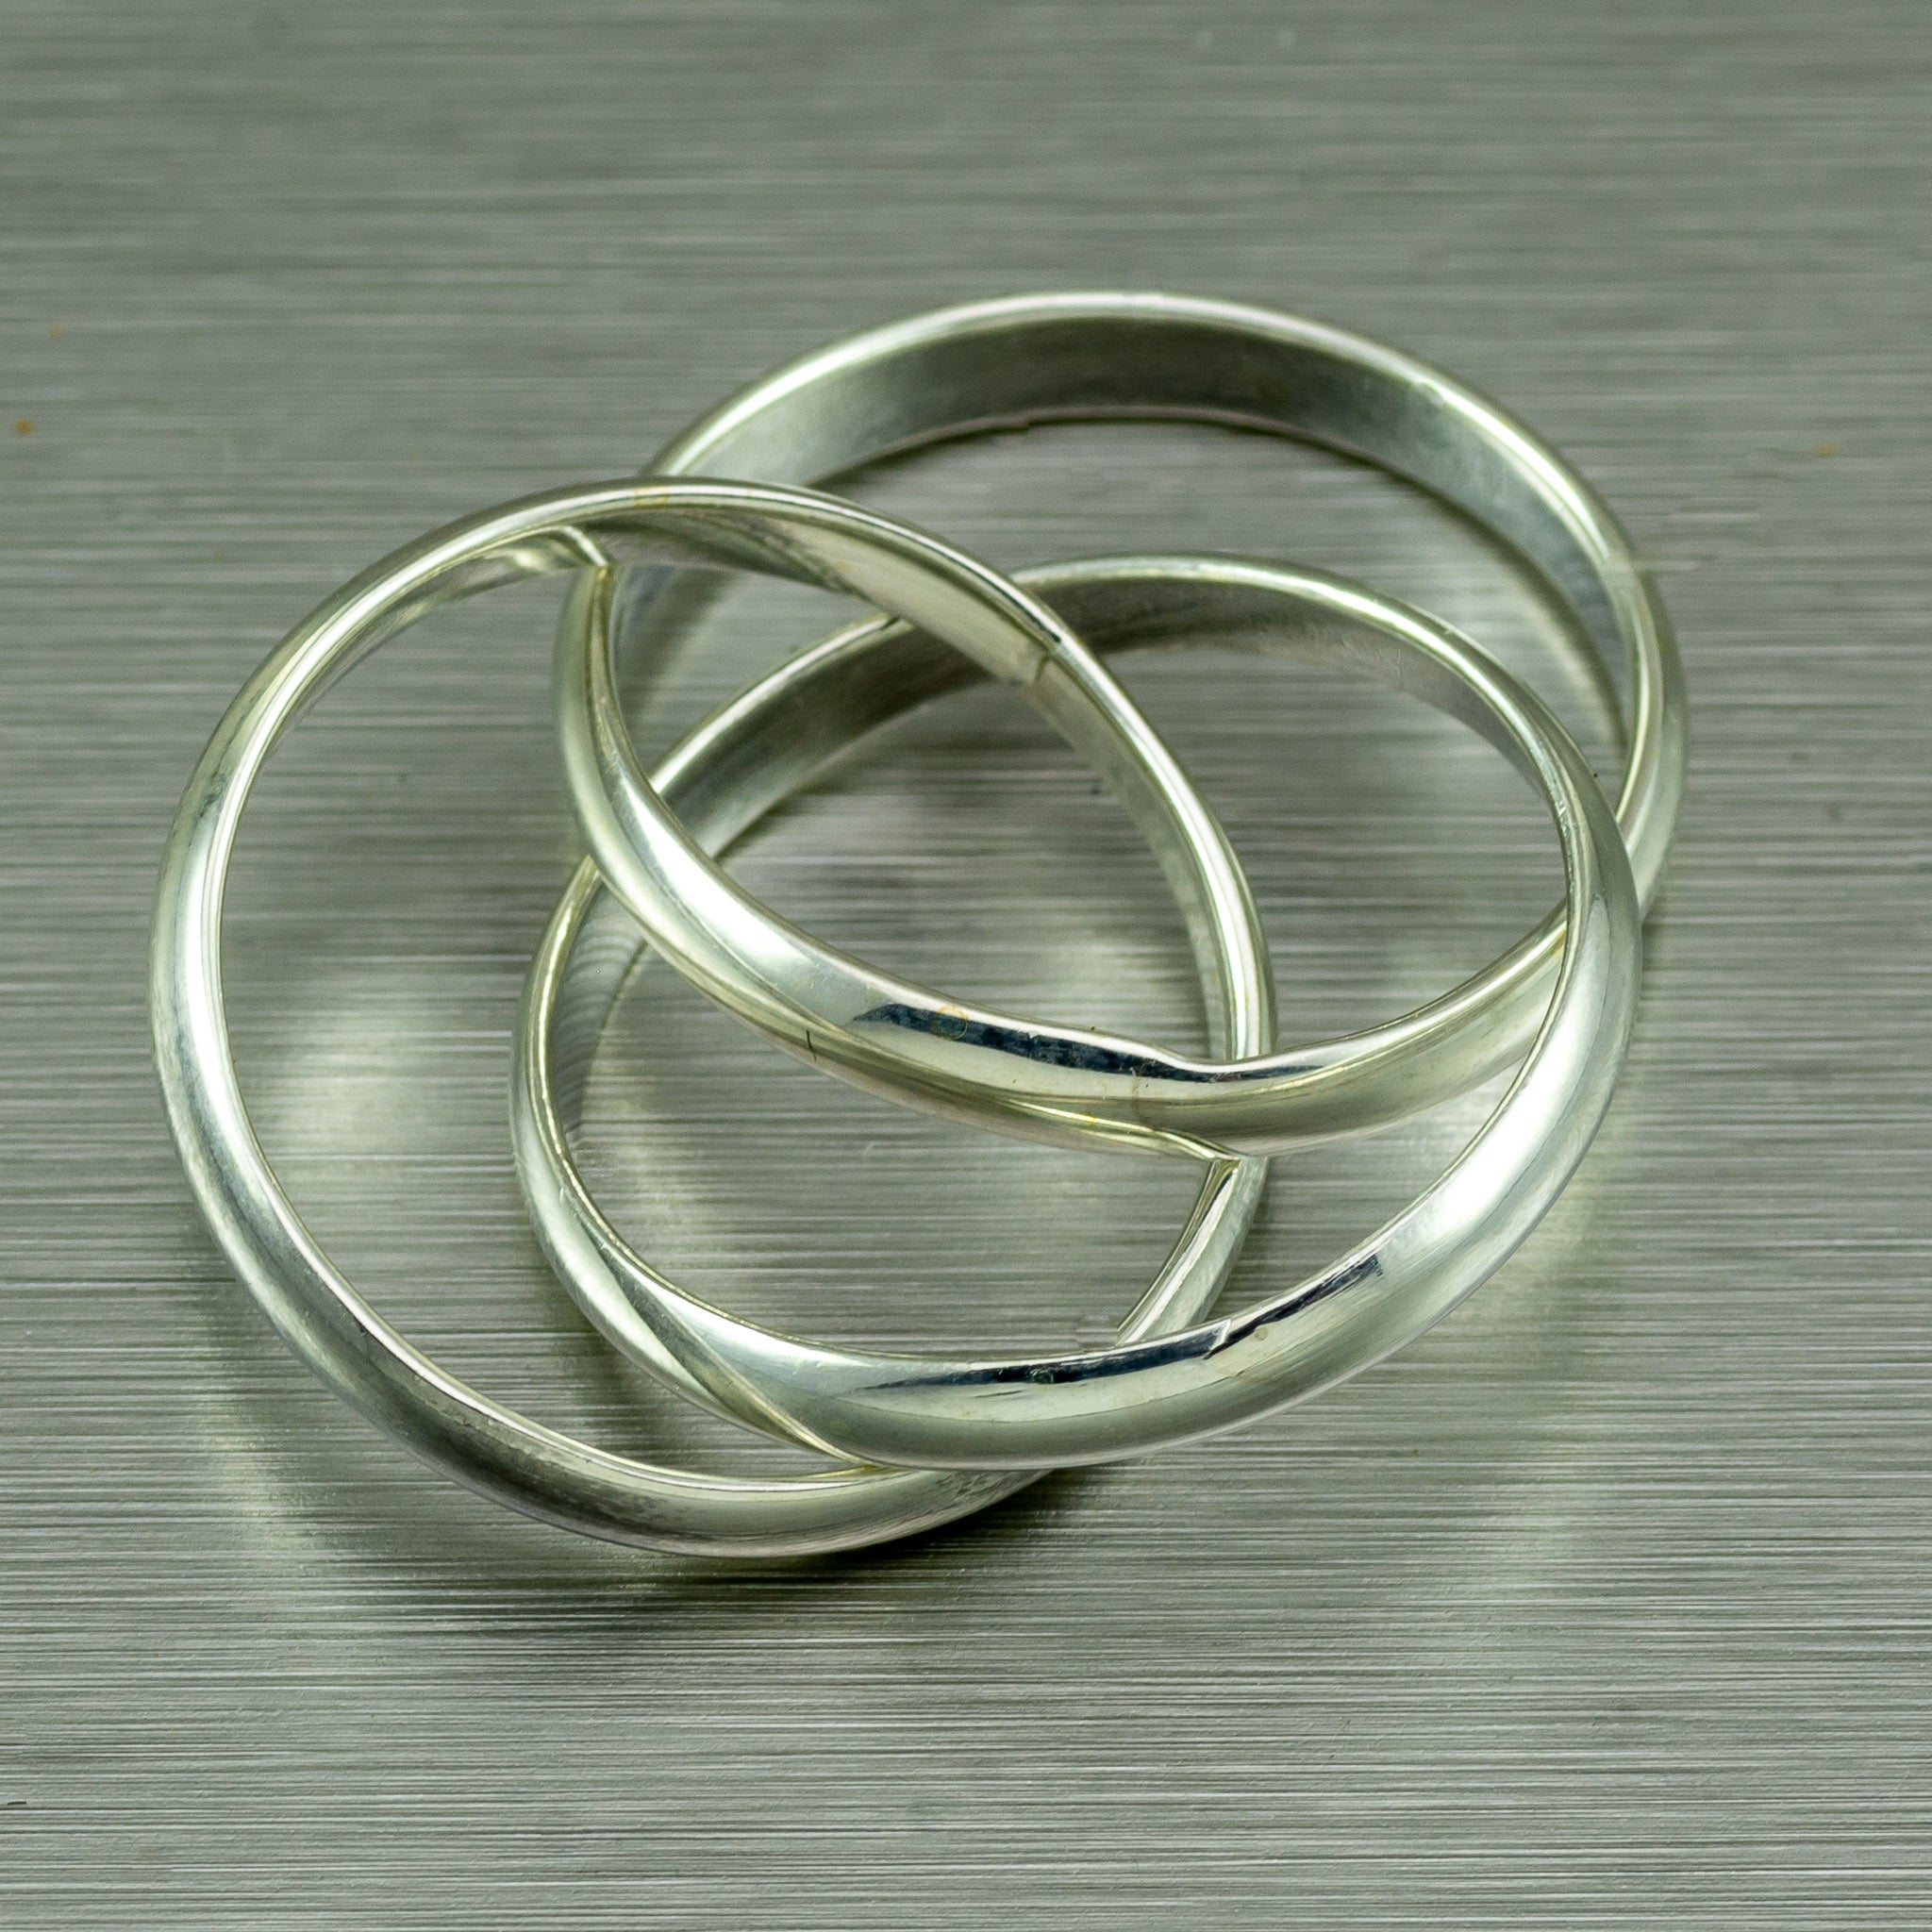 Russian Three-Tone 1/2 rounded Wedding Ring